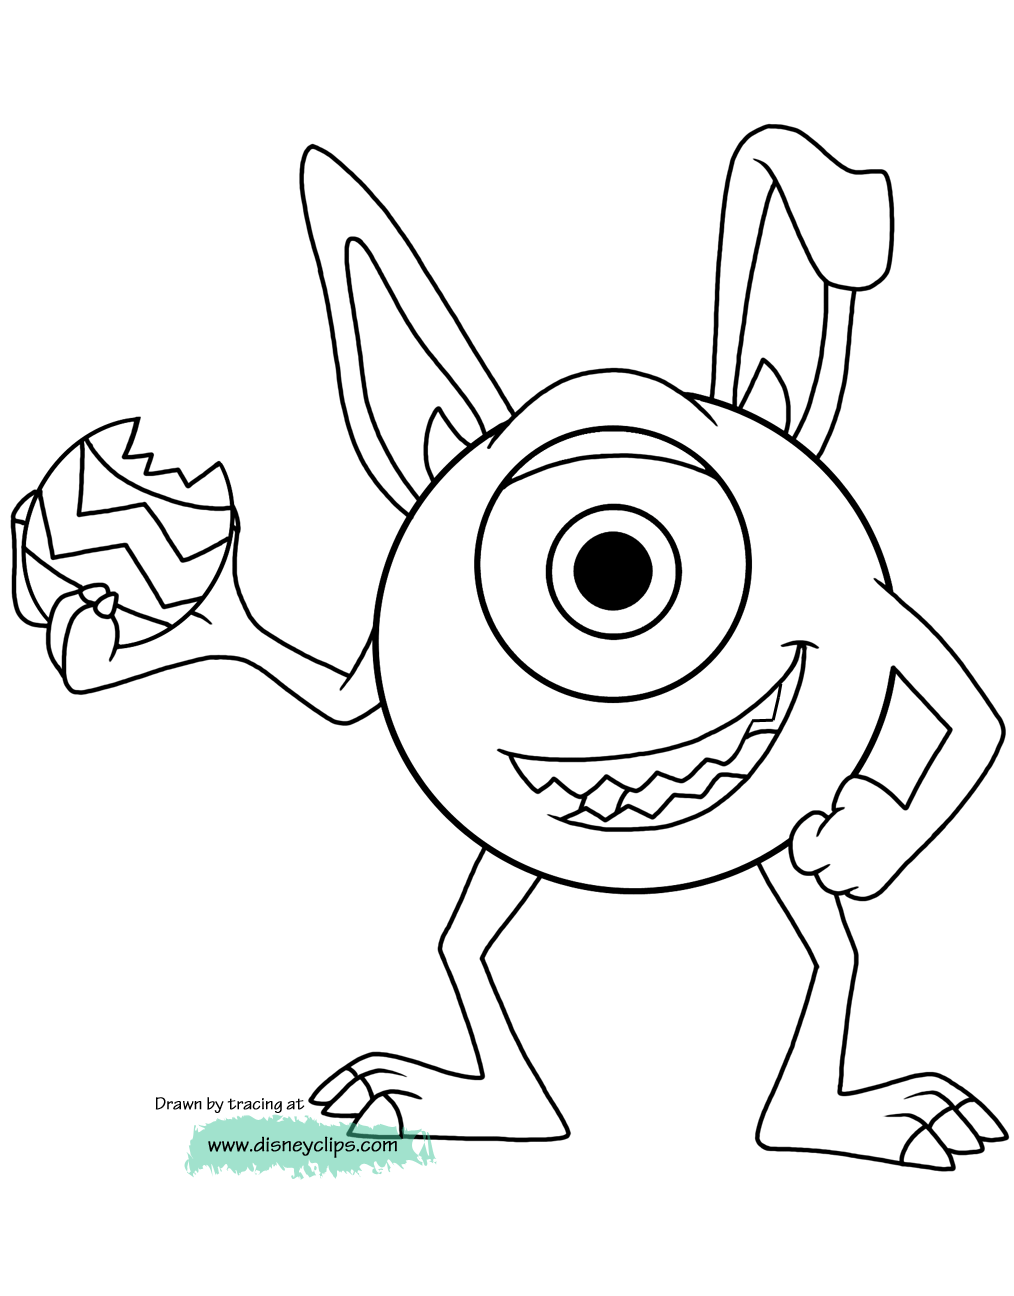 Disney Easter Coloring Pages 3 | Disneyclips.com